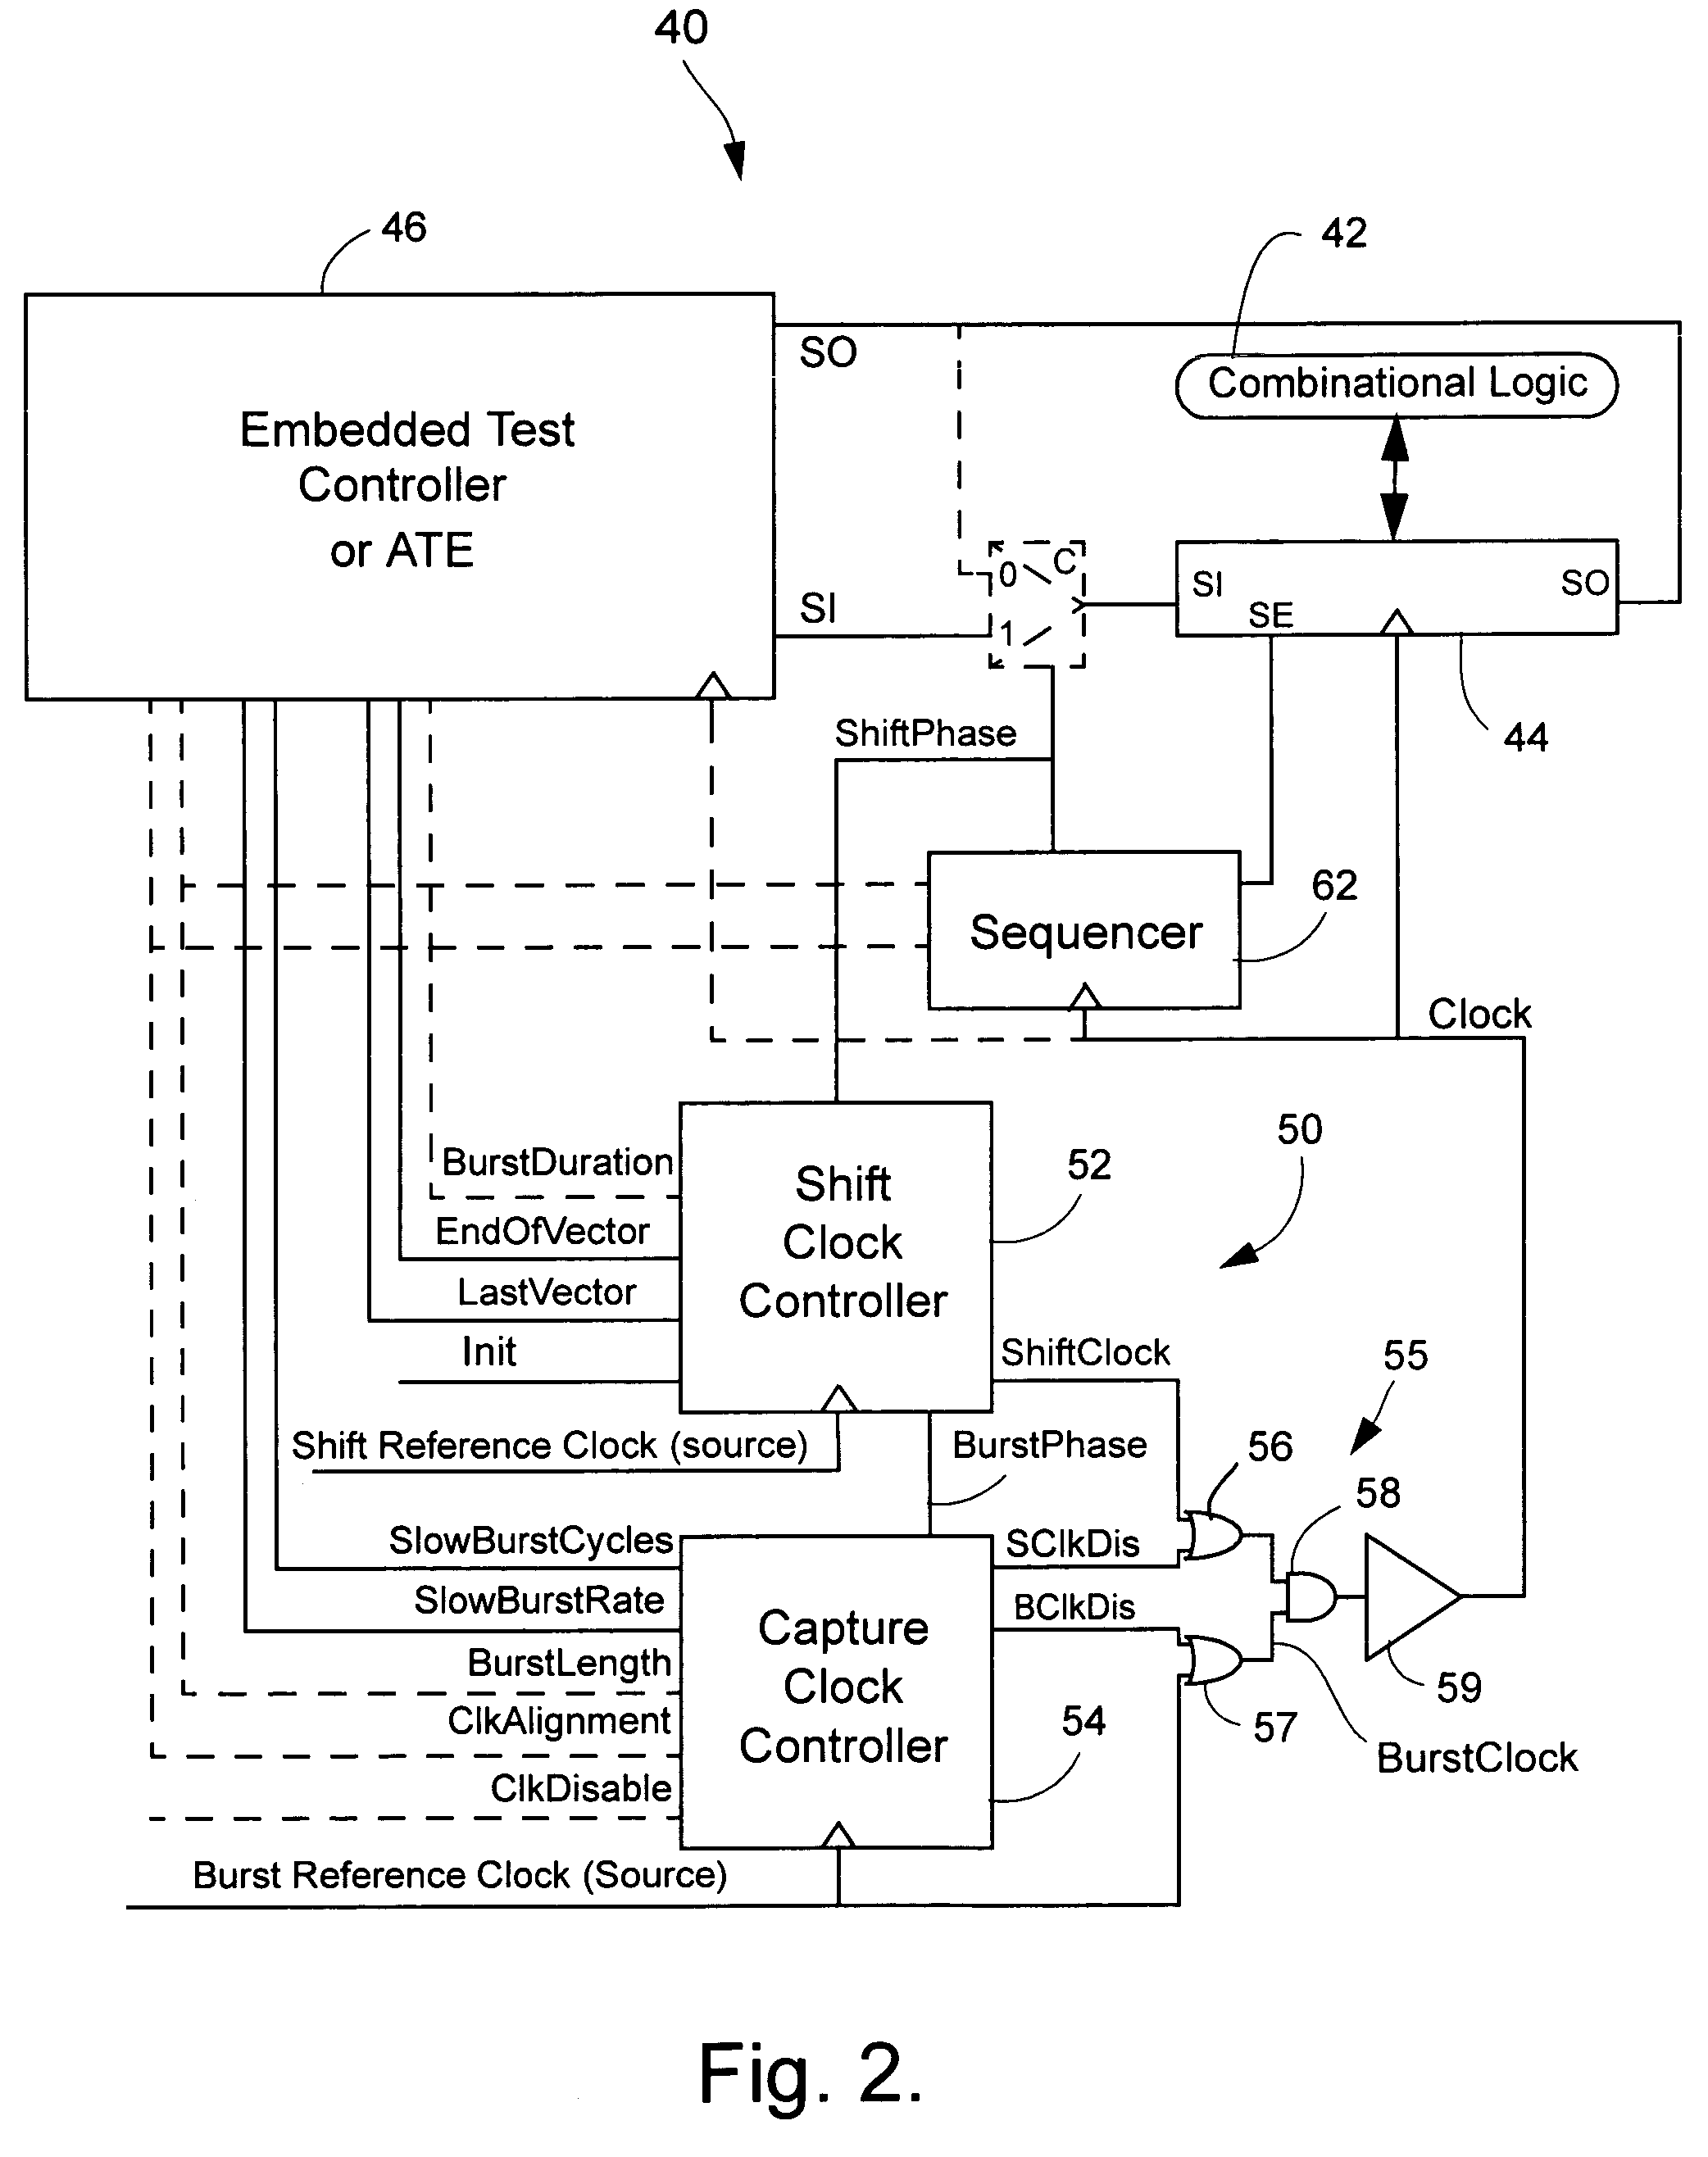 Clock controller for at-speed testing of scan circuits